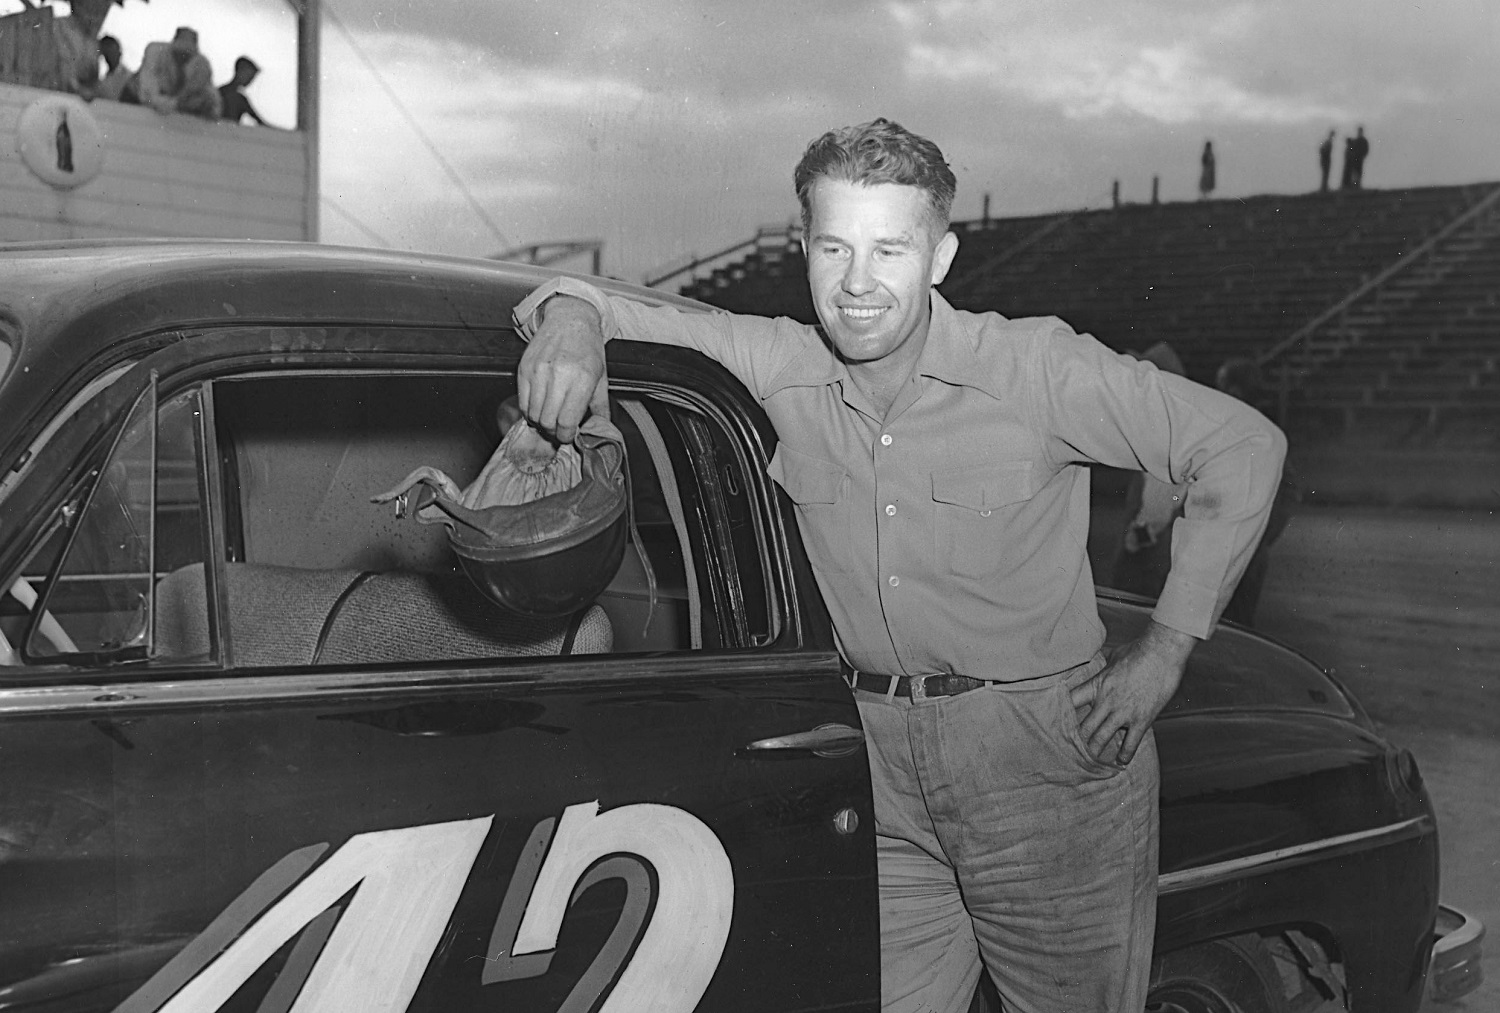 Lee Petty poses next to his car before a race circa 1949. | ISC Archives/CQ-Roll Call Group via Getty Images